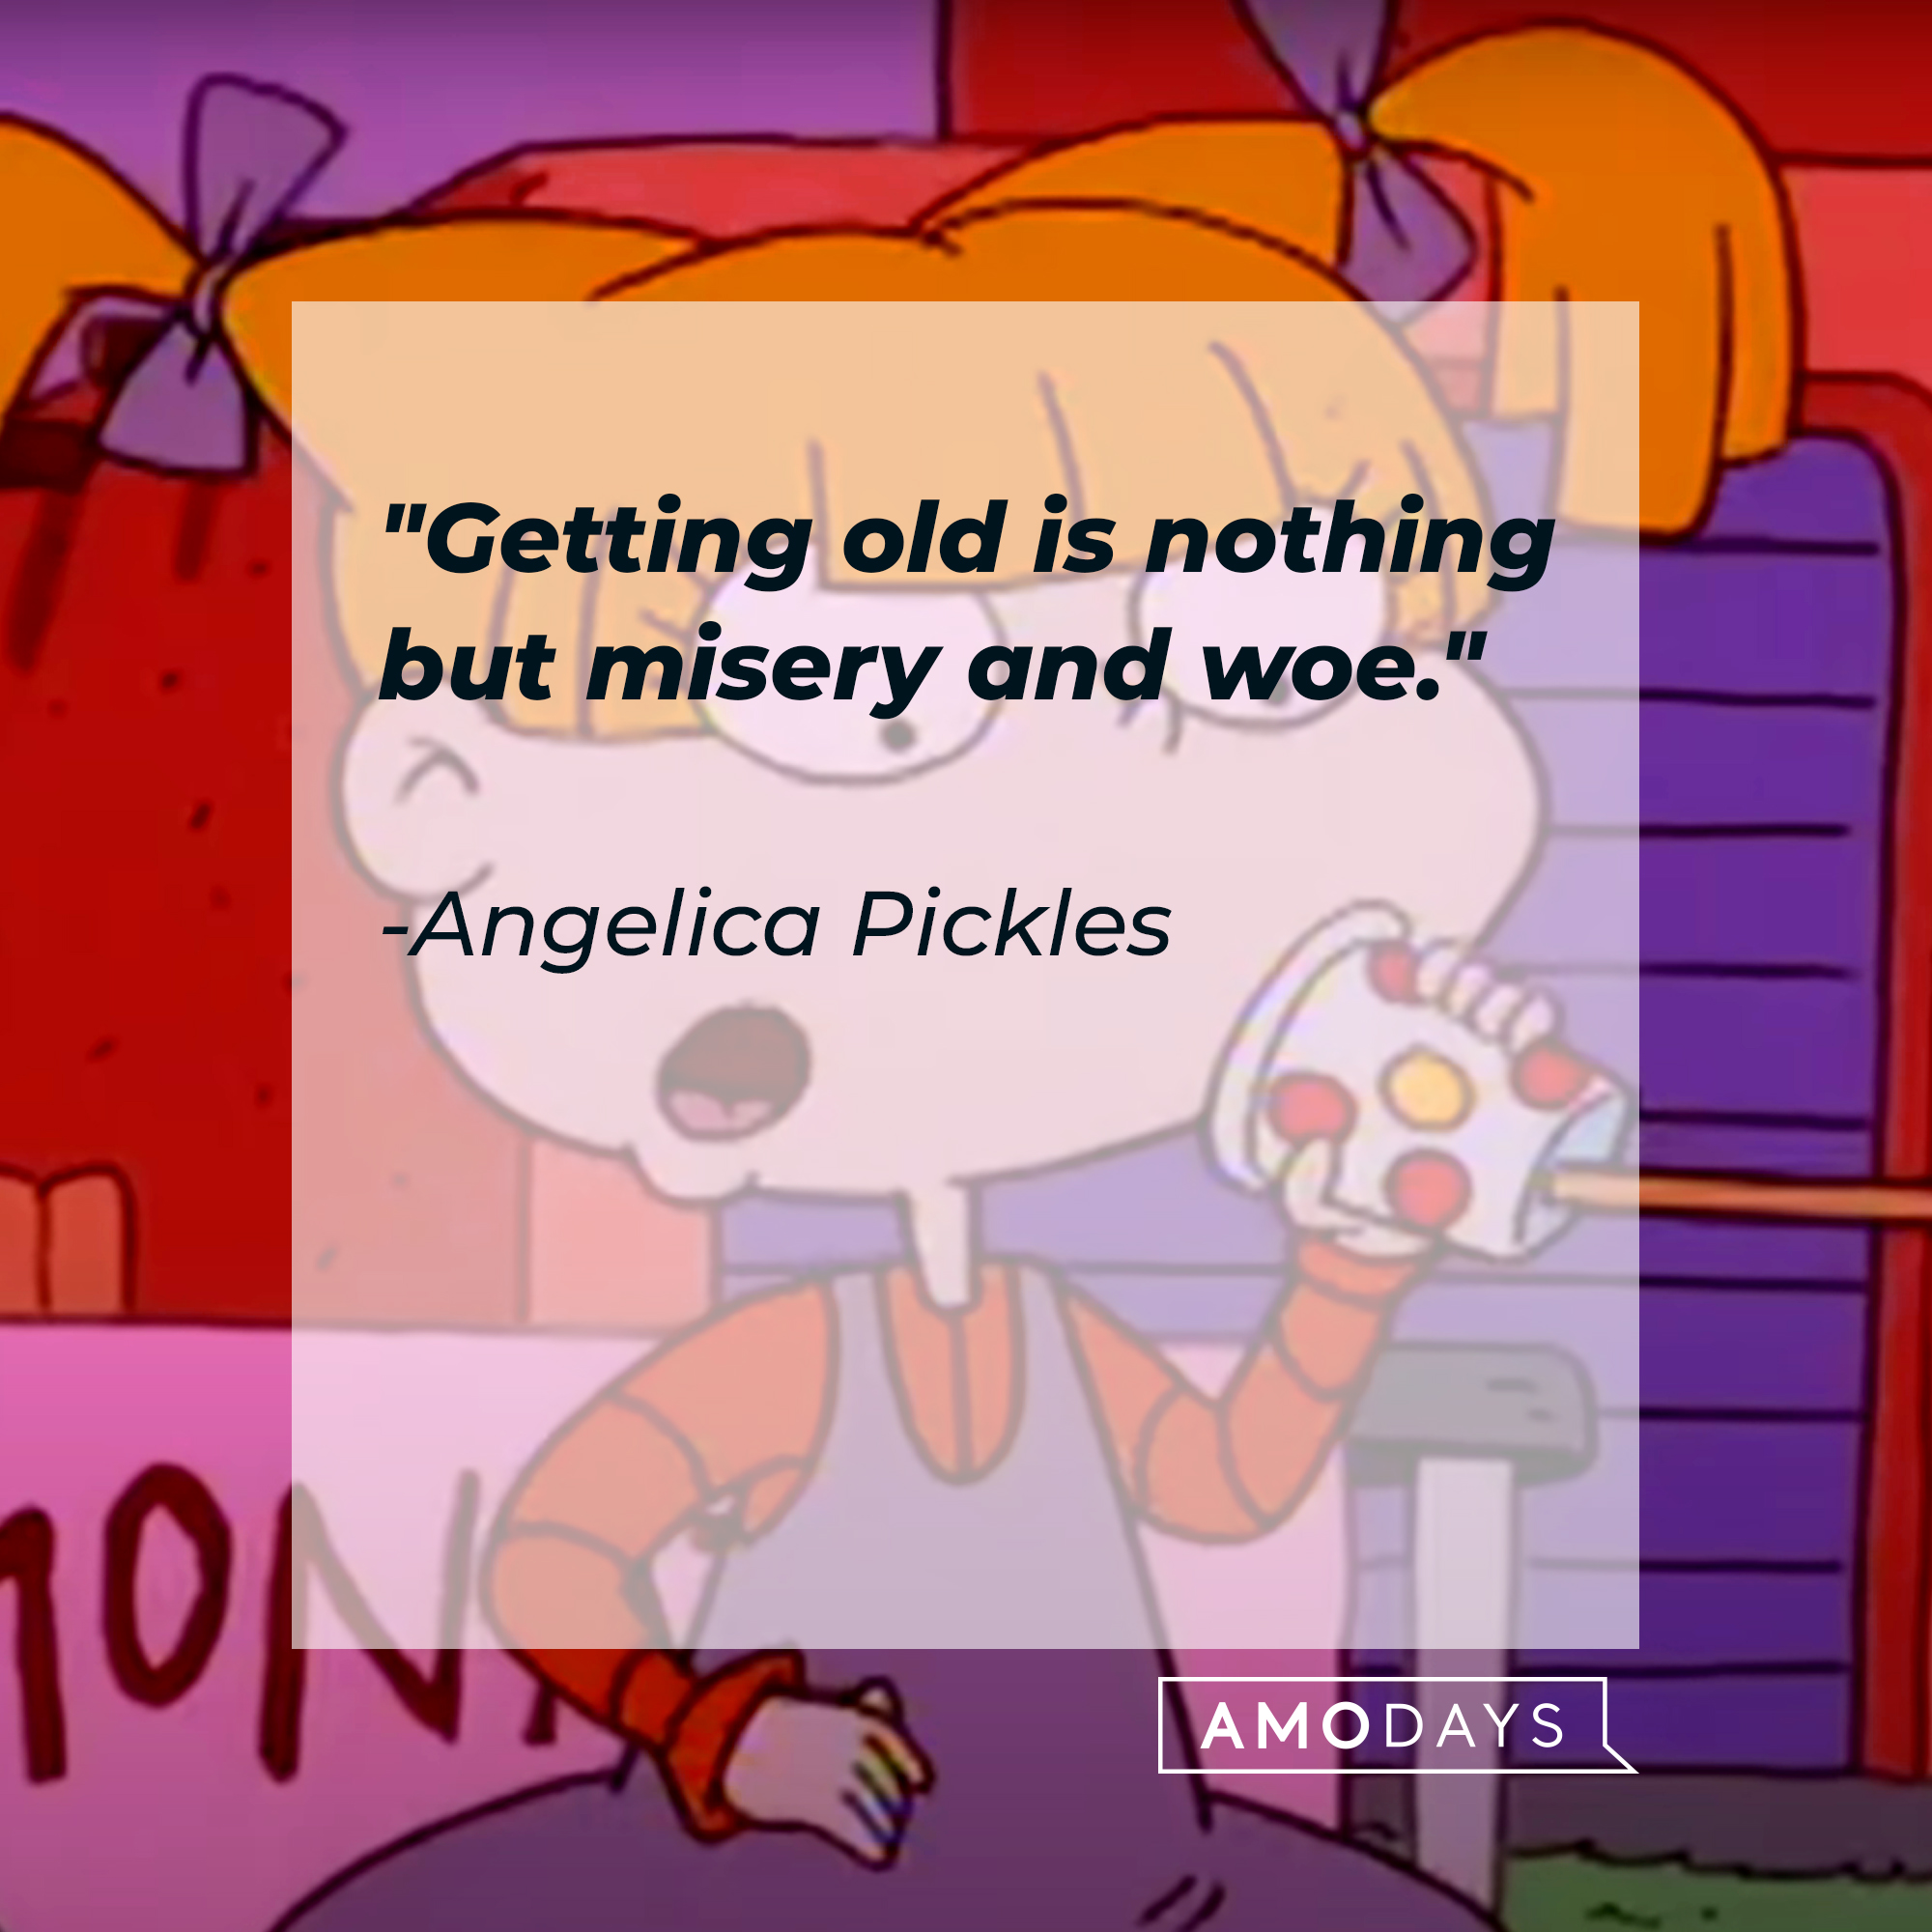 Angelica Pickles’ quote: "Getting old is nothing but misery and woe." | Source: Facebook/Rugrats